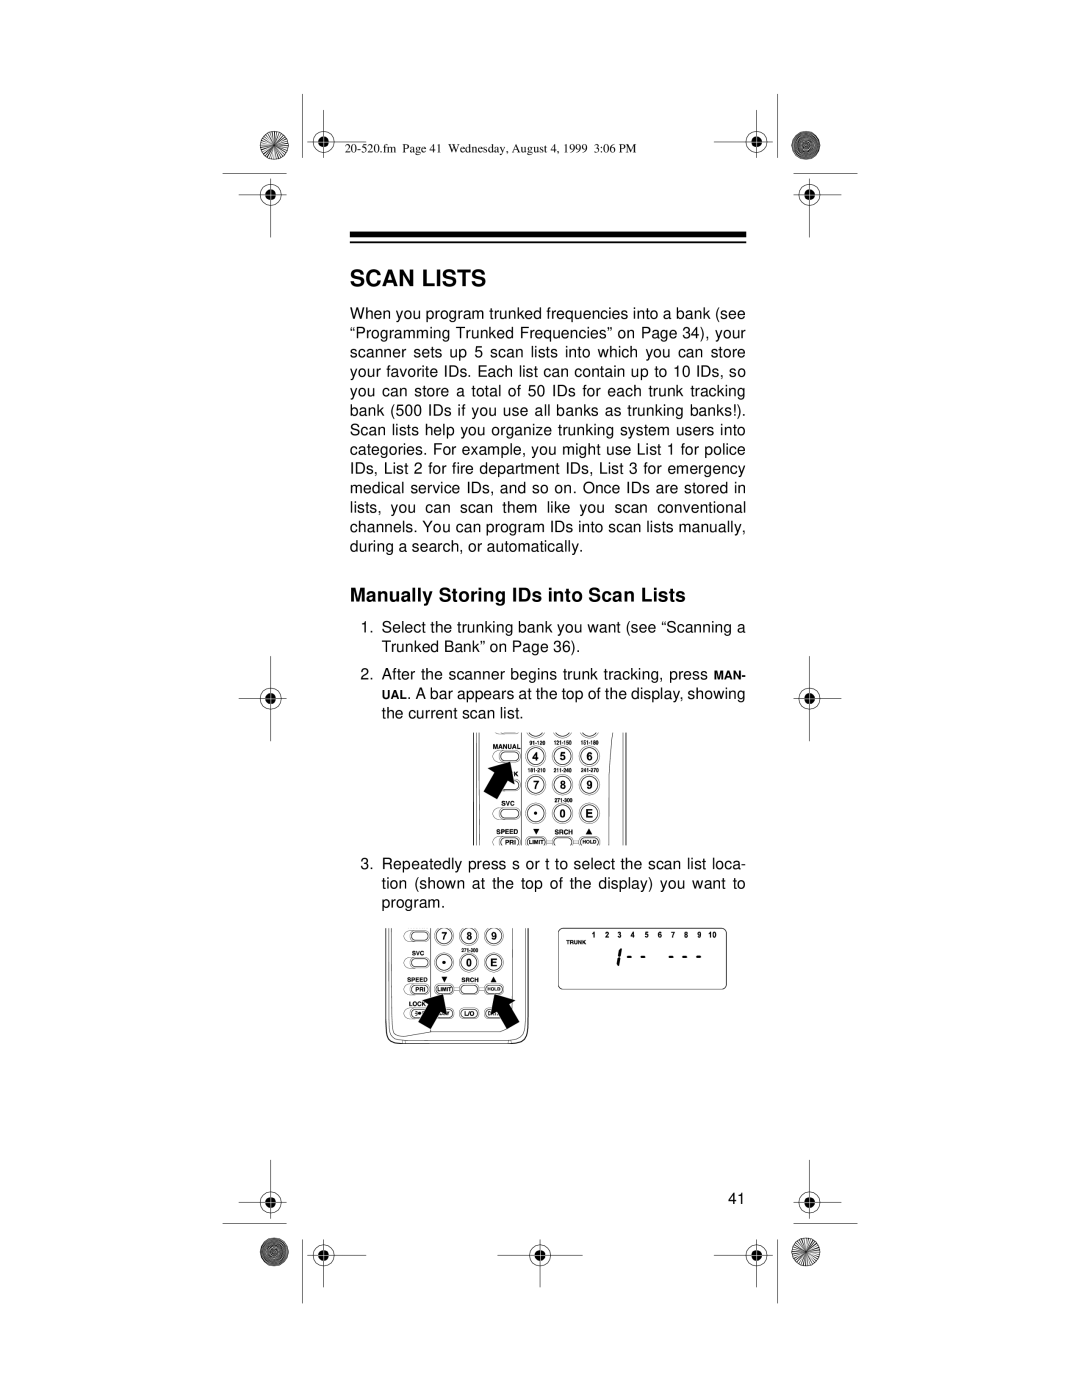 Radio Shack PRO-90 owner manual Manually Storing IDs into Scan Lists 